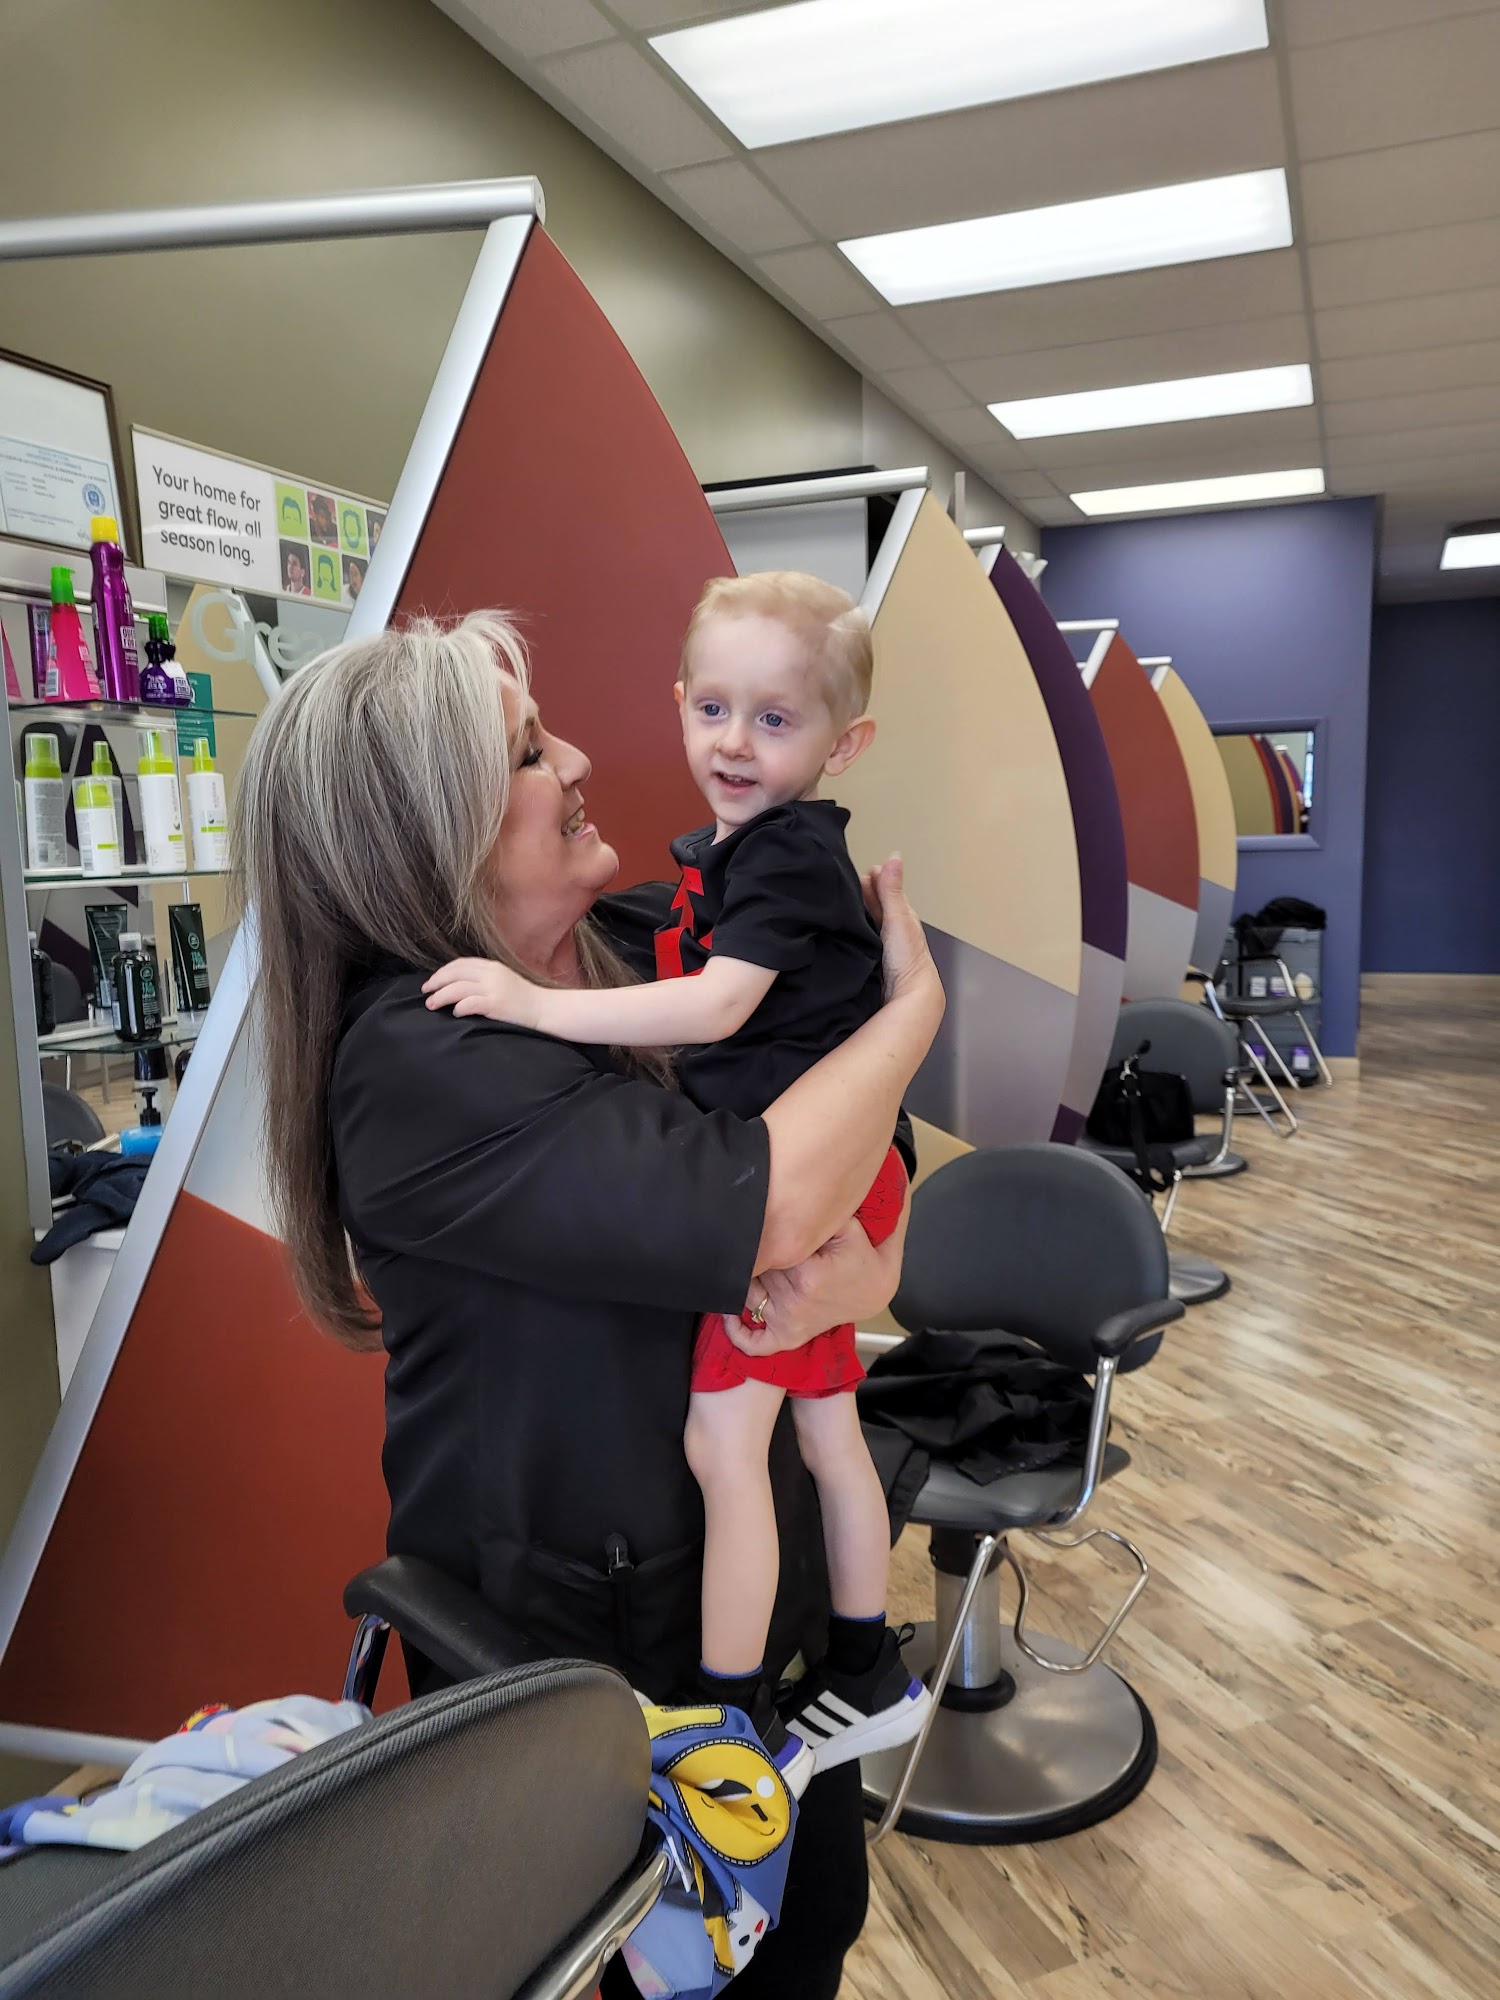 Great Clips 904 S Grower's Grove Blvd, Ste C, Payson Utah 84651